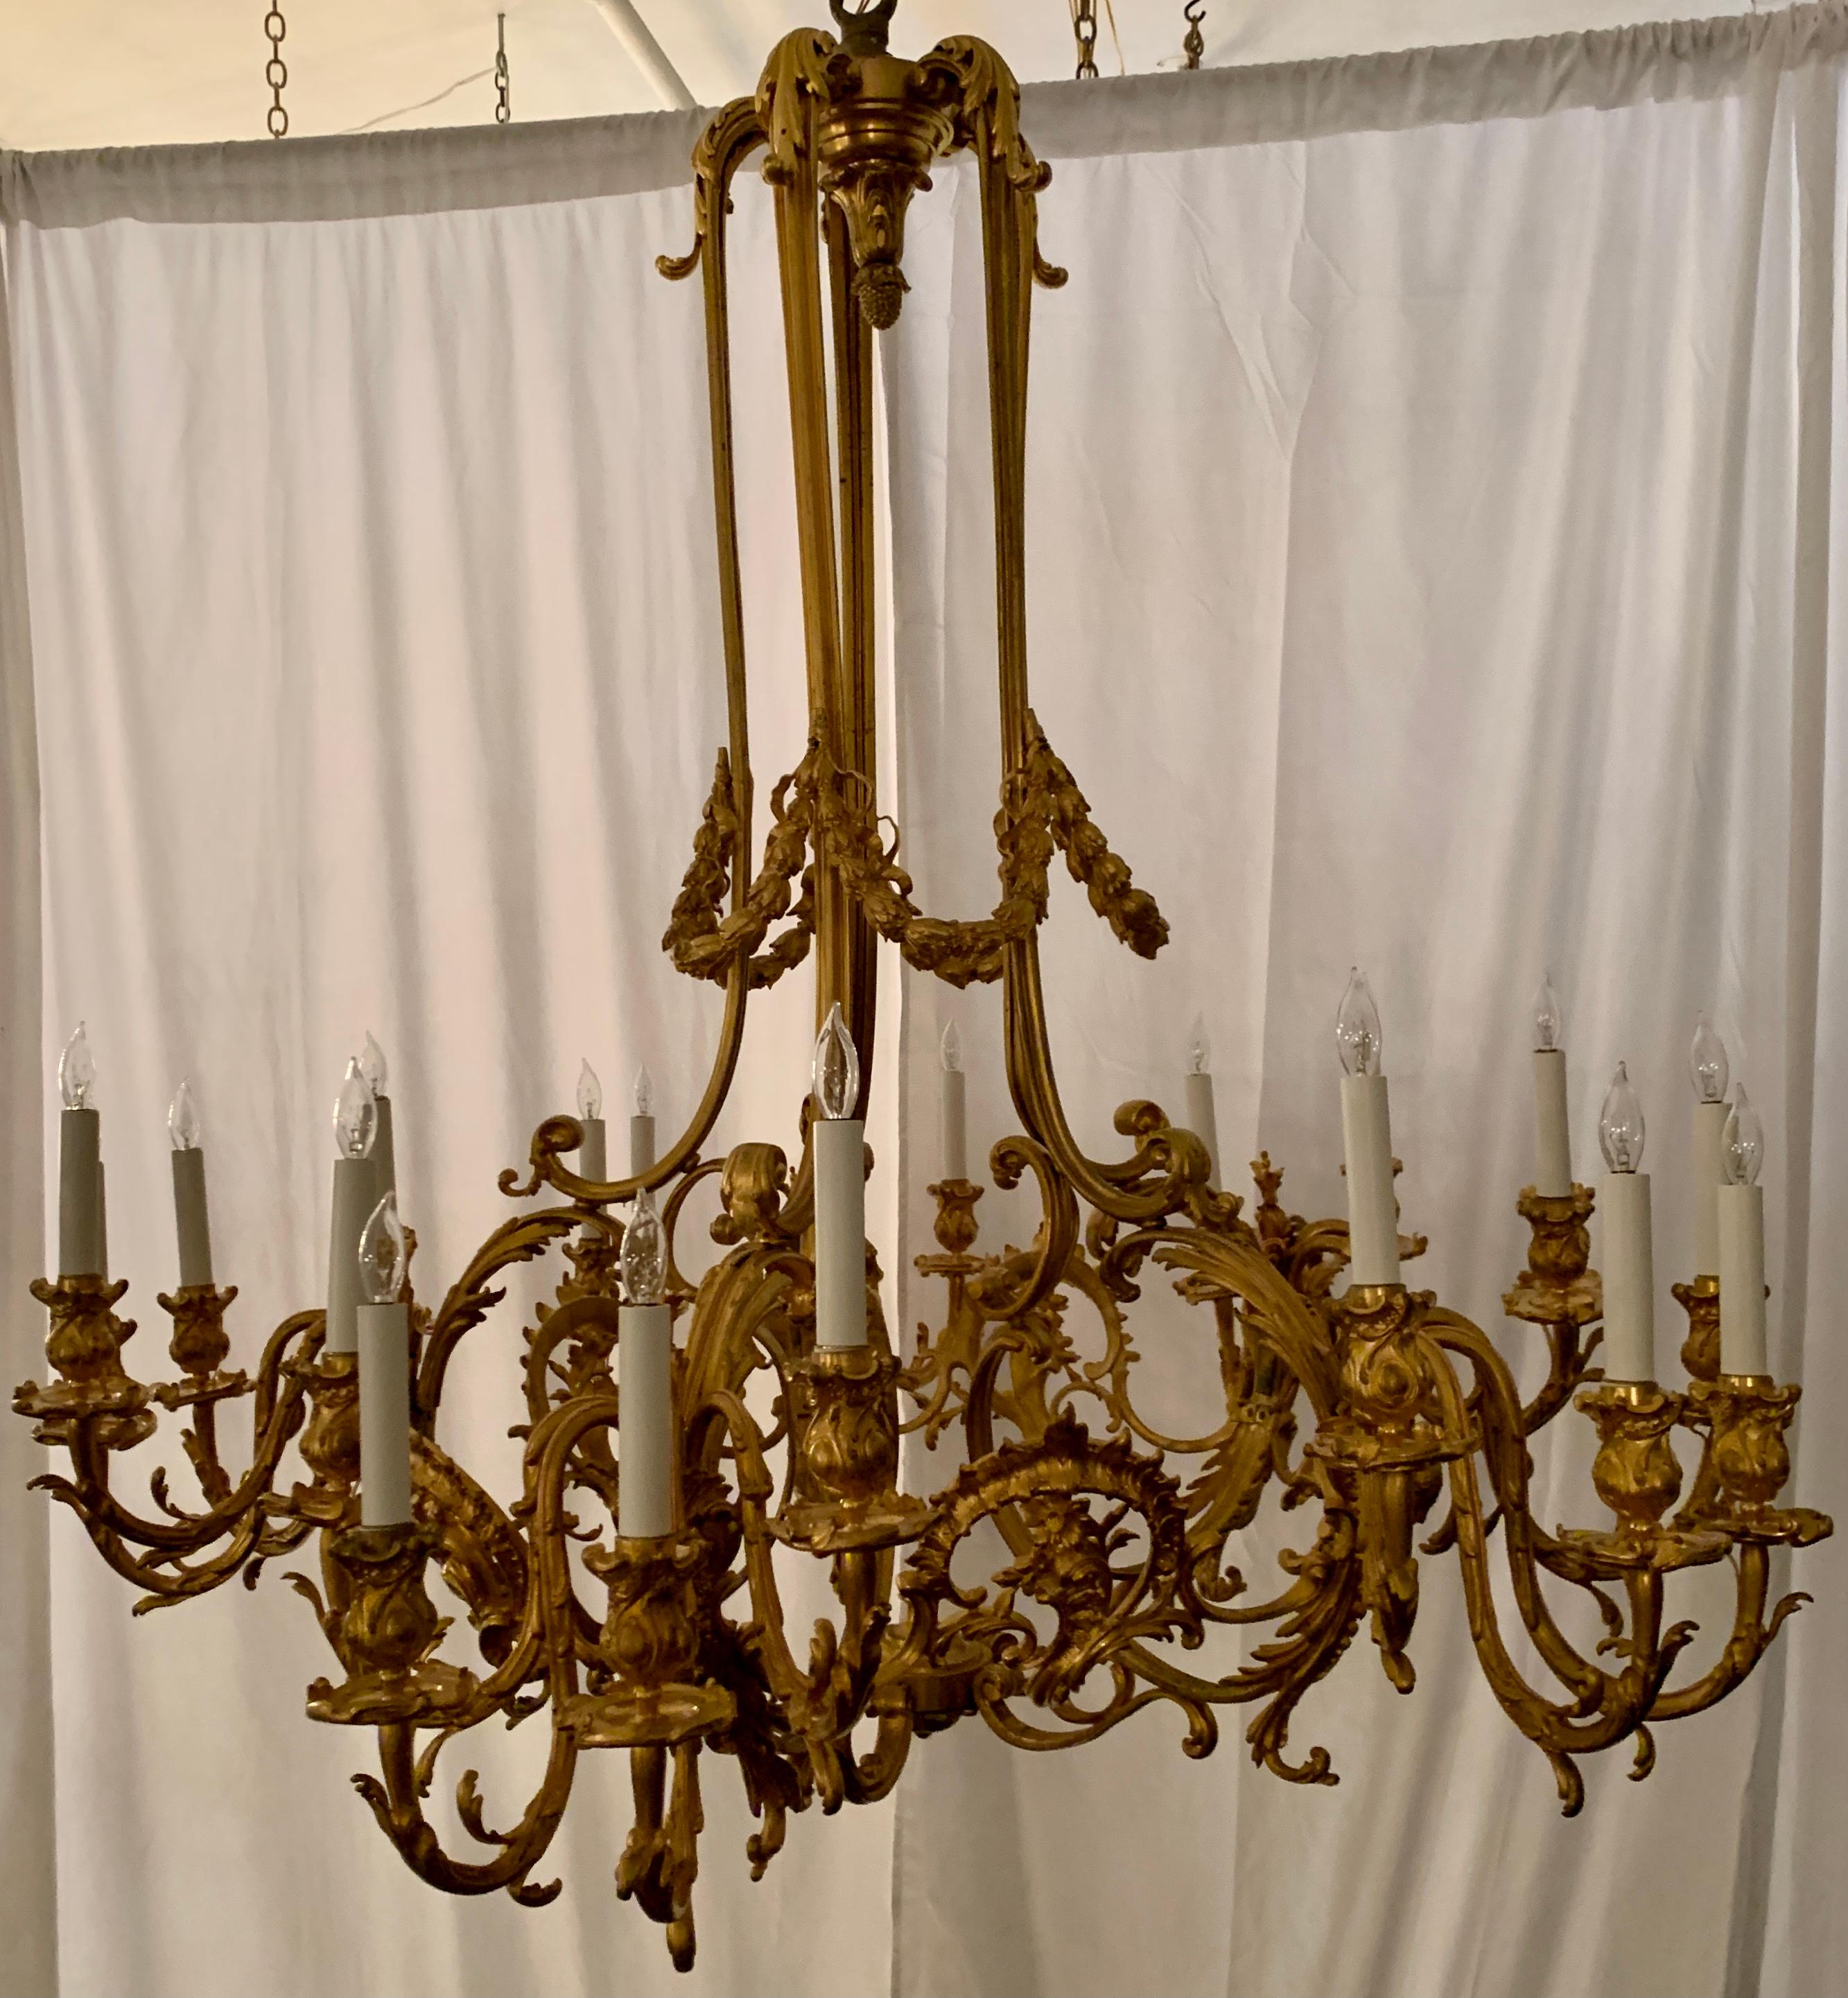 A fine gold bronze chandelier made by Ferdinand Barbedienne foundry, the best caster and bronzer chaser in 19th century France.